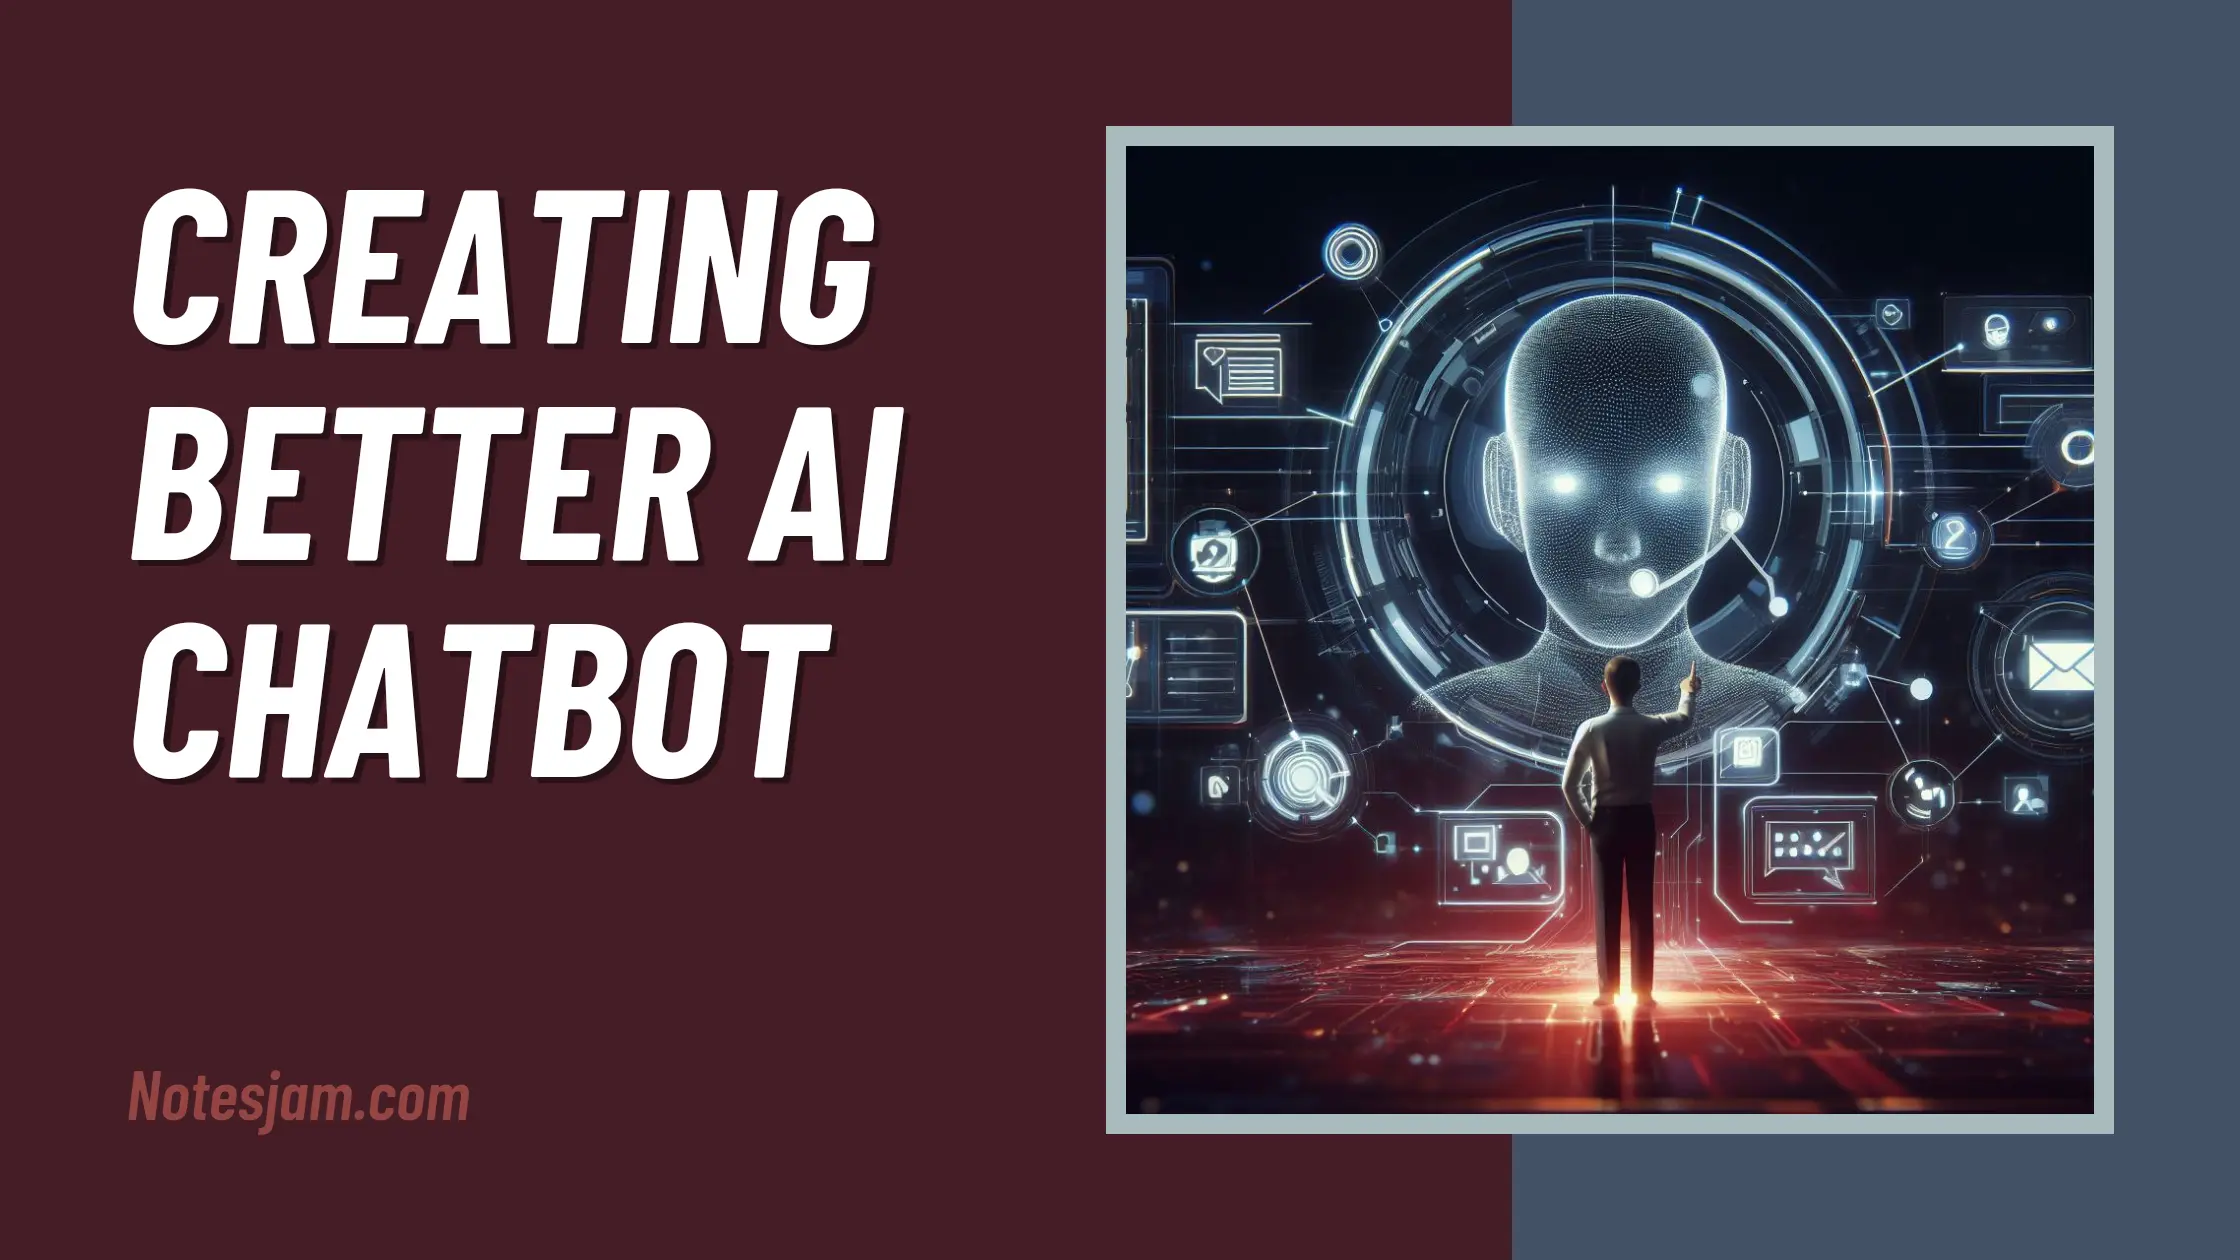 Creating Better AI Chats: 10 Common Mistakes You Should Avoid